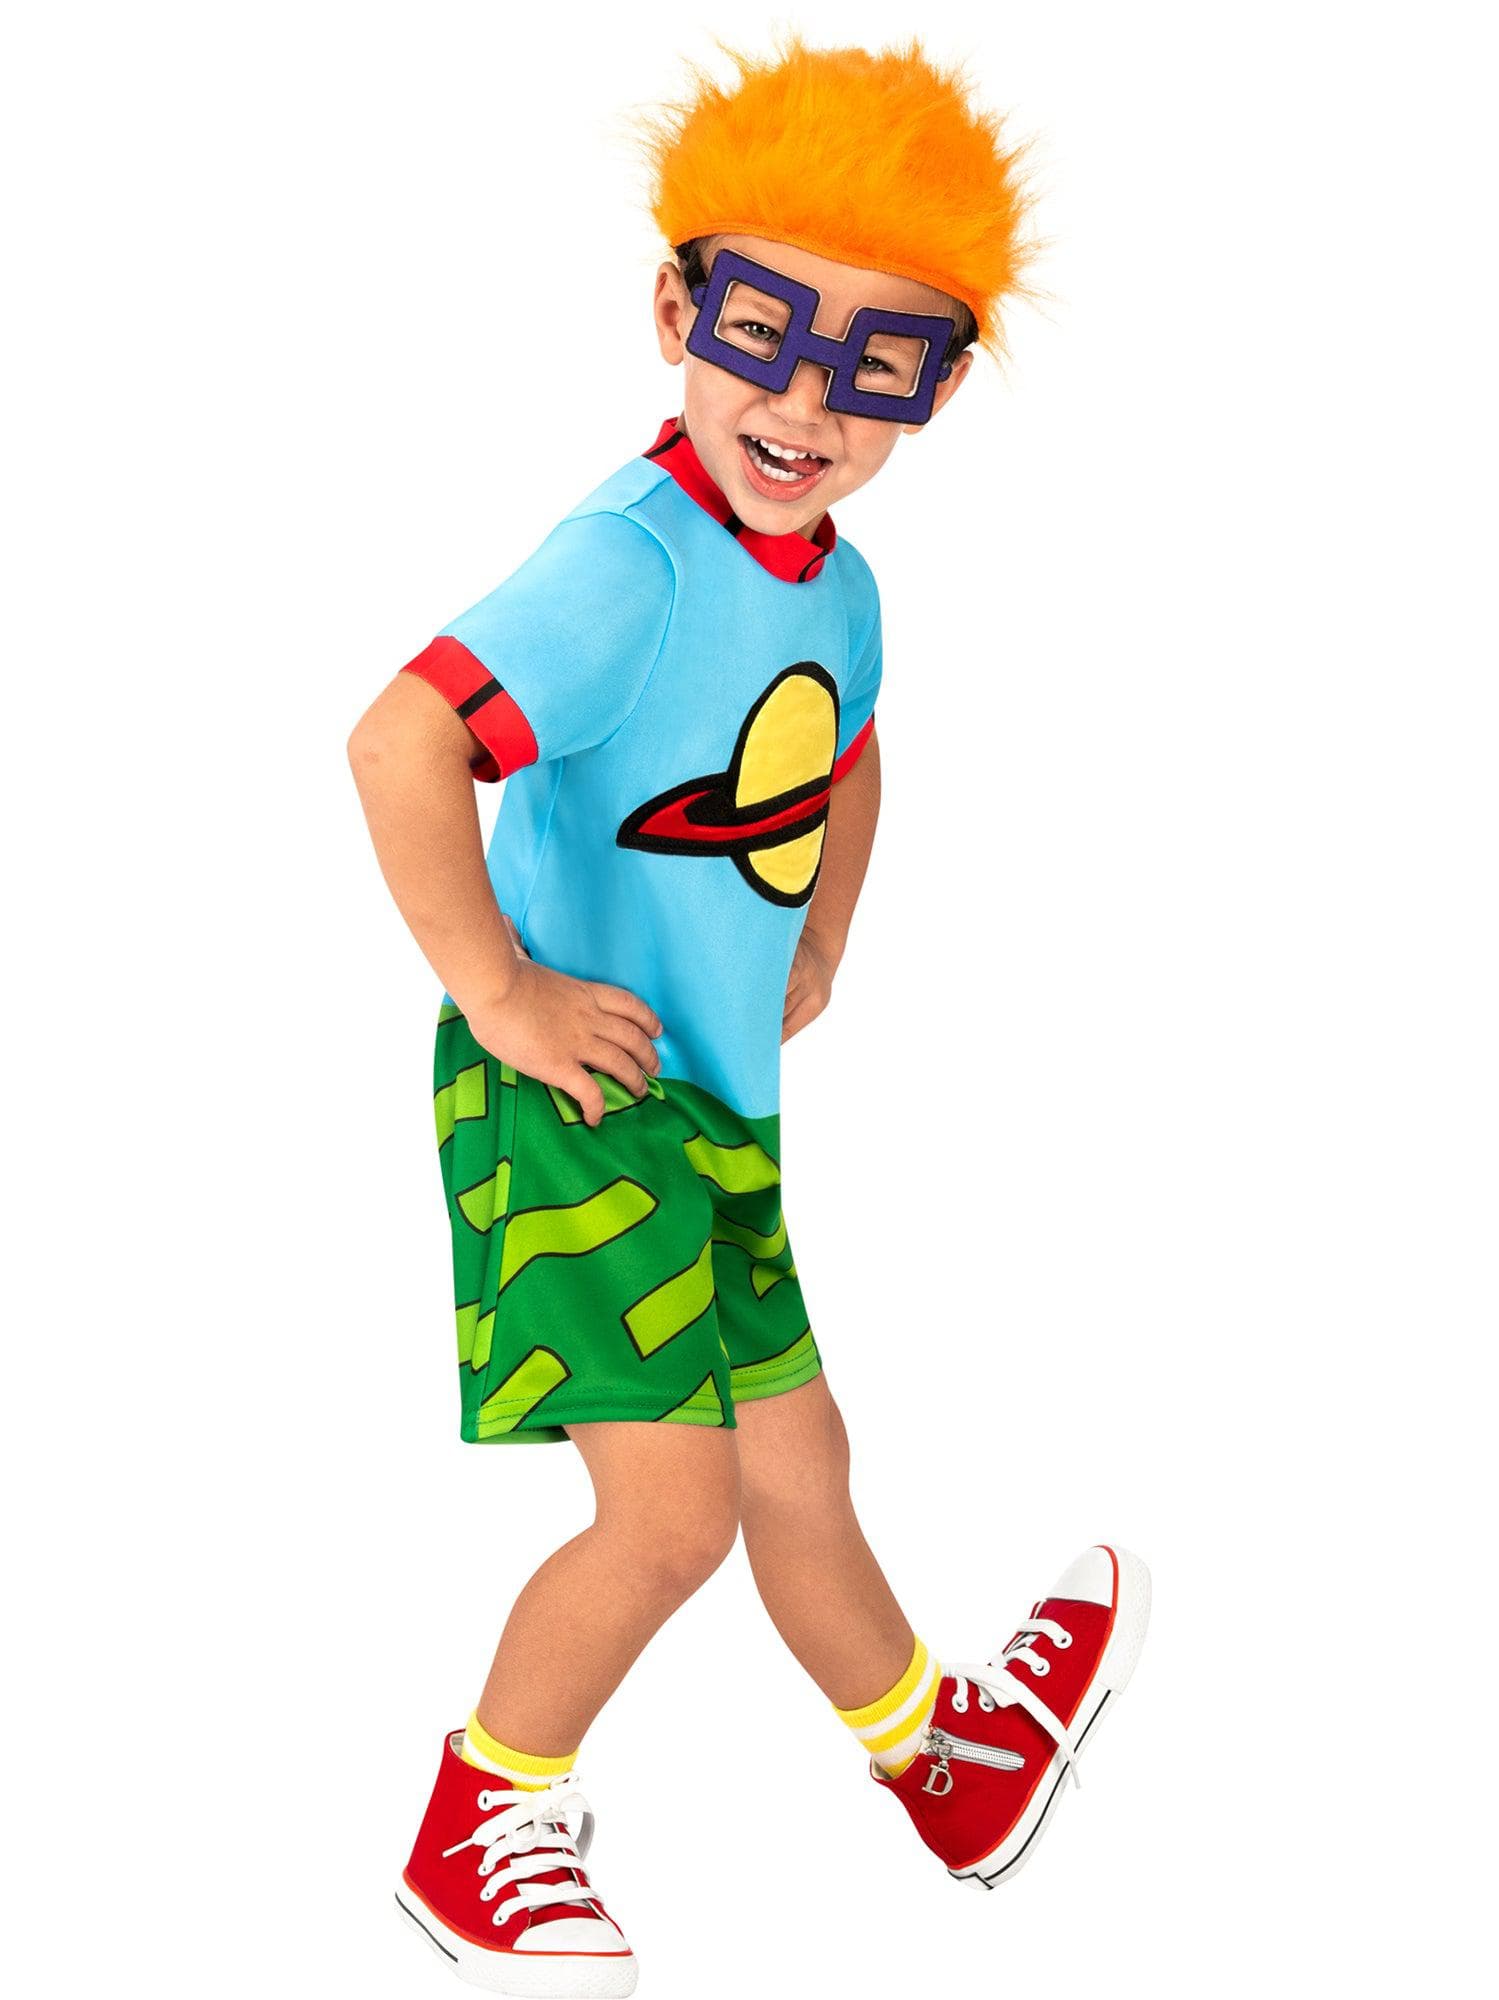 Baby/Toddler Rugrats Chuckie Costume - costumes.com